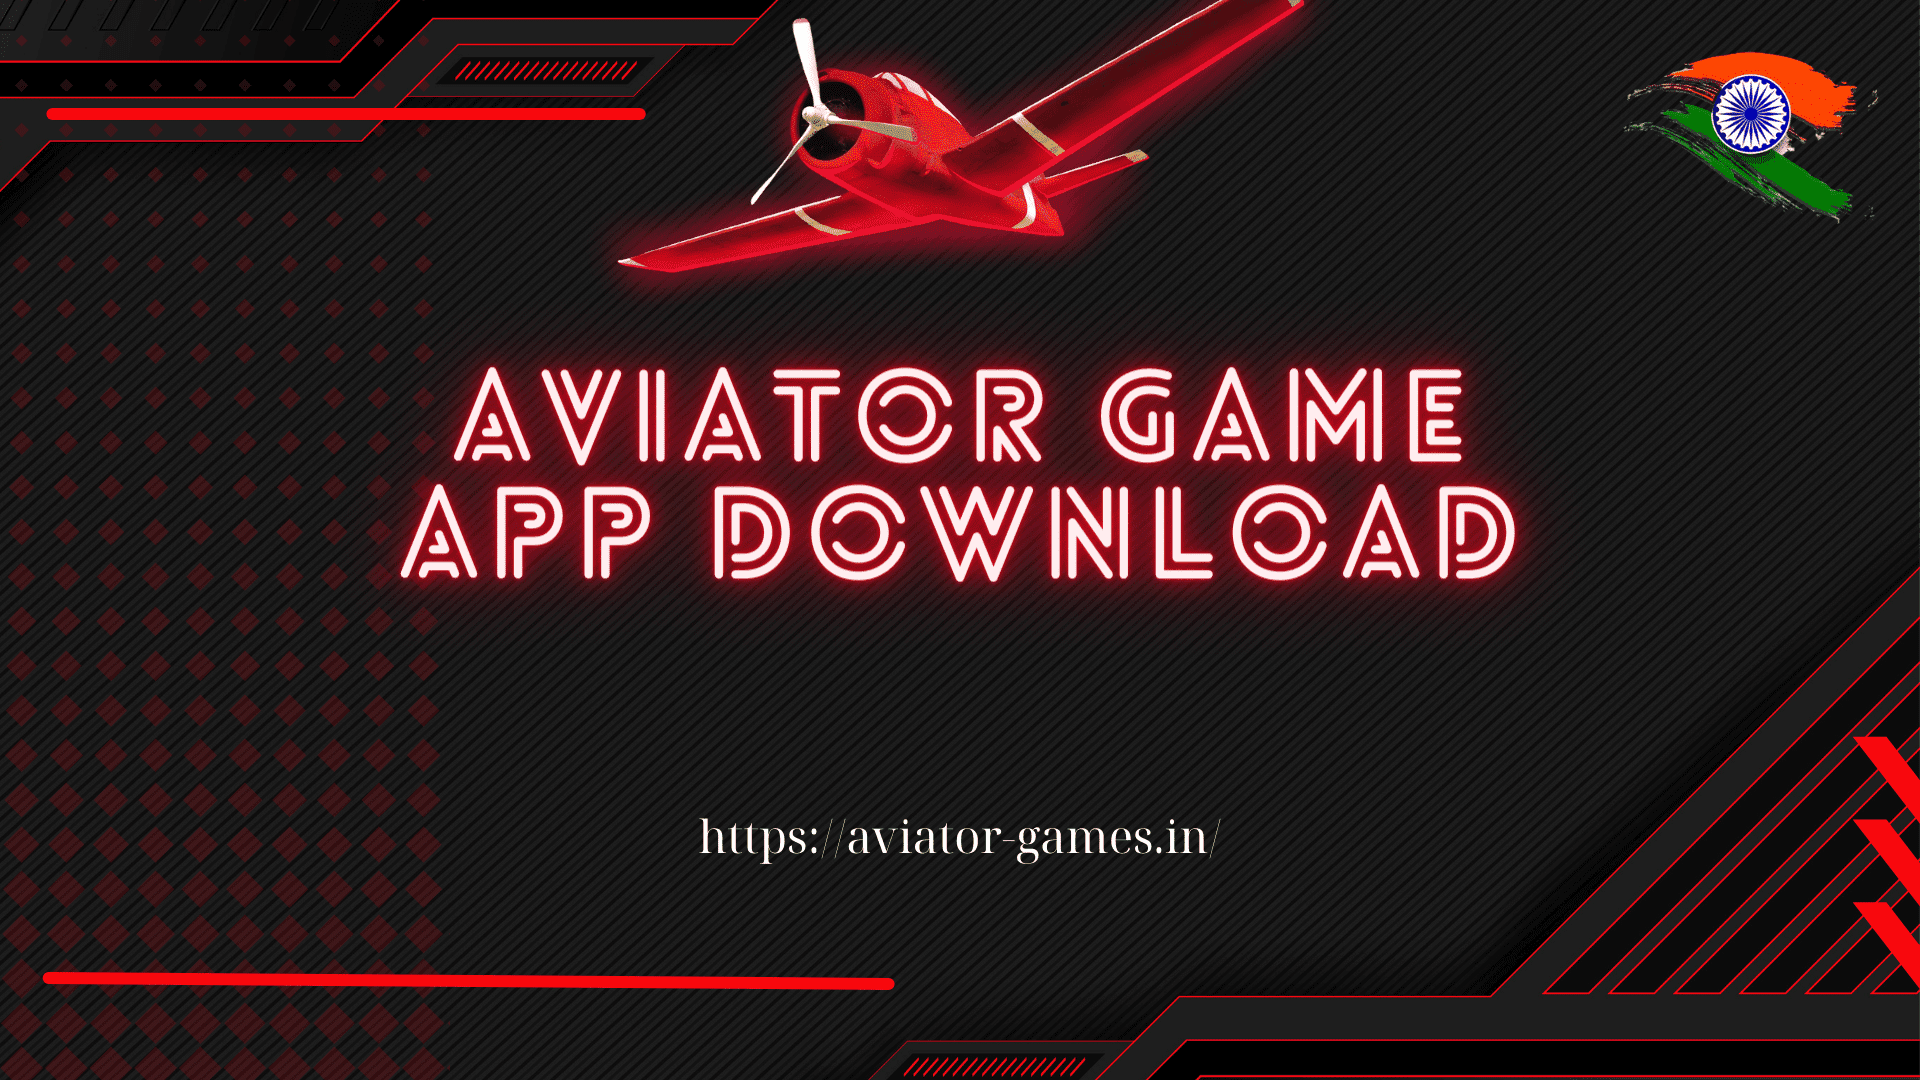 Aviator Game App (APK) Download for Android & iOS in India